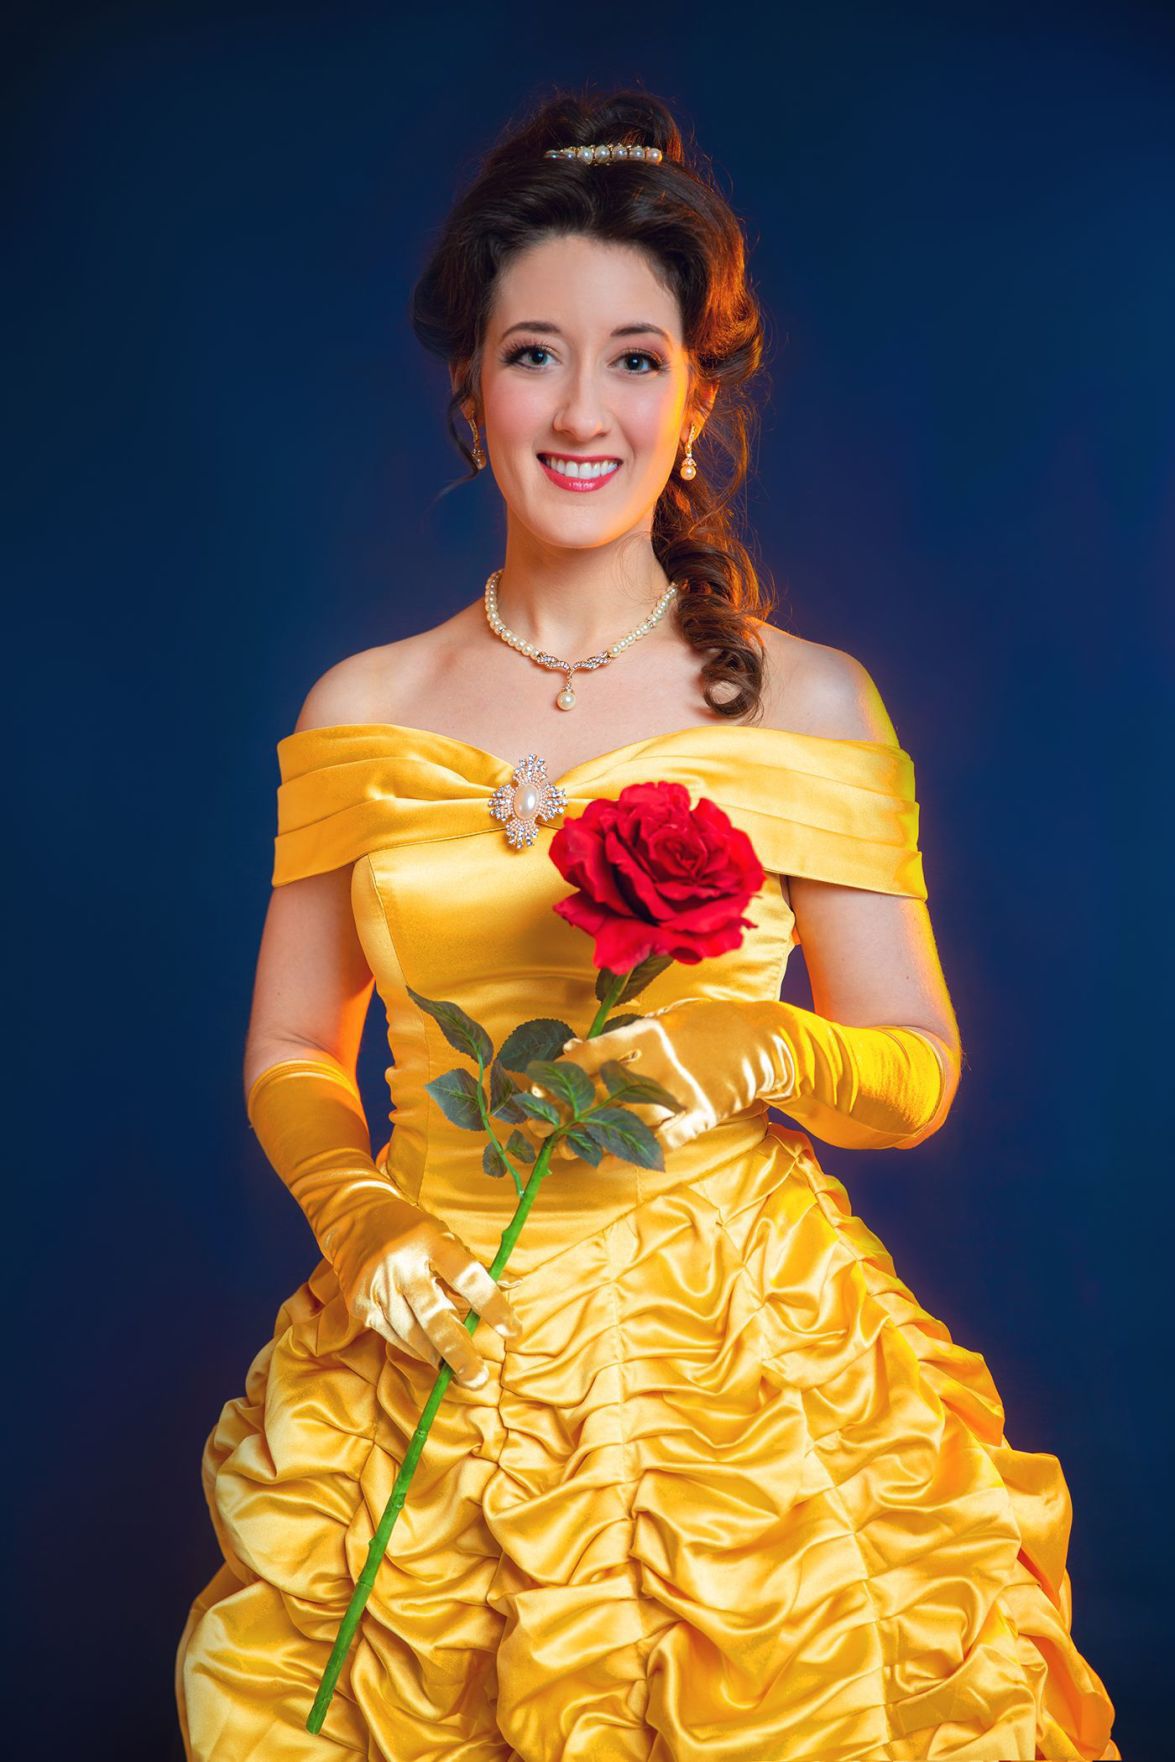 Beauty And The Beast Opens New Year For Local Theater Entertainment Tulsaworld Com